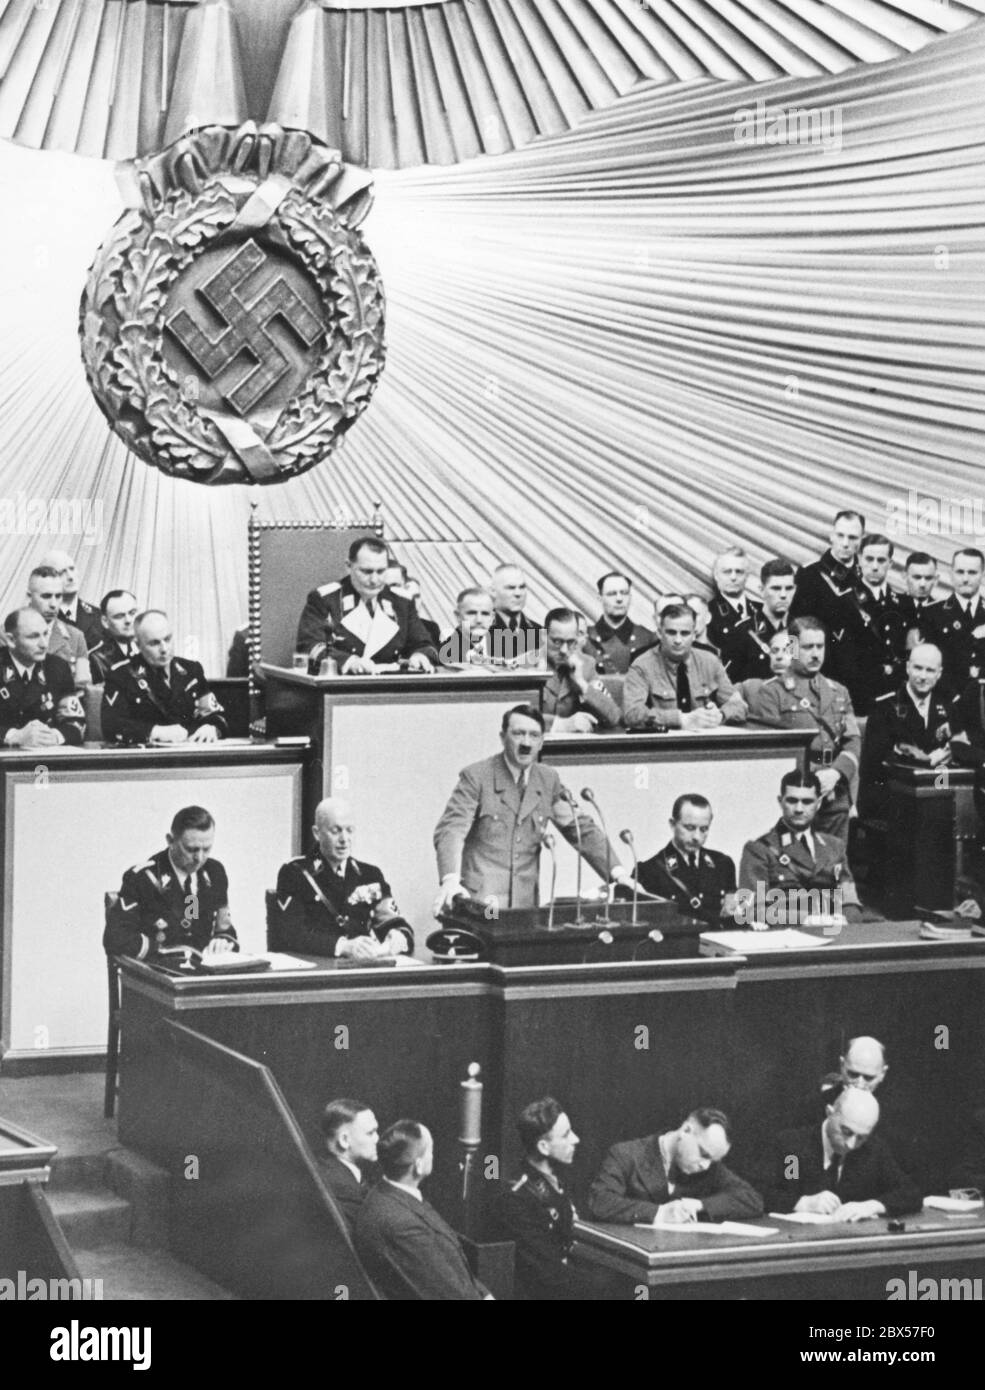 Session of the Reichstag in the Berlin Kroll Opera House on 18.03.1938 during the speech of Adolf Hitler. Behind Hitler at the desk of the Reichstag President, Hermann Goering. Sitting to his left, from left to right: Wilhelm Brueckner and Hans-Heinrich Lammers. Stock Photo